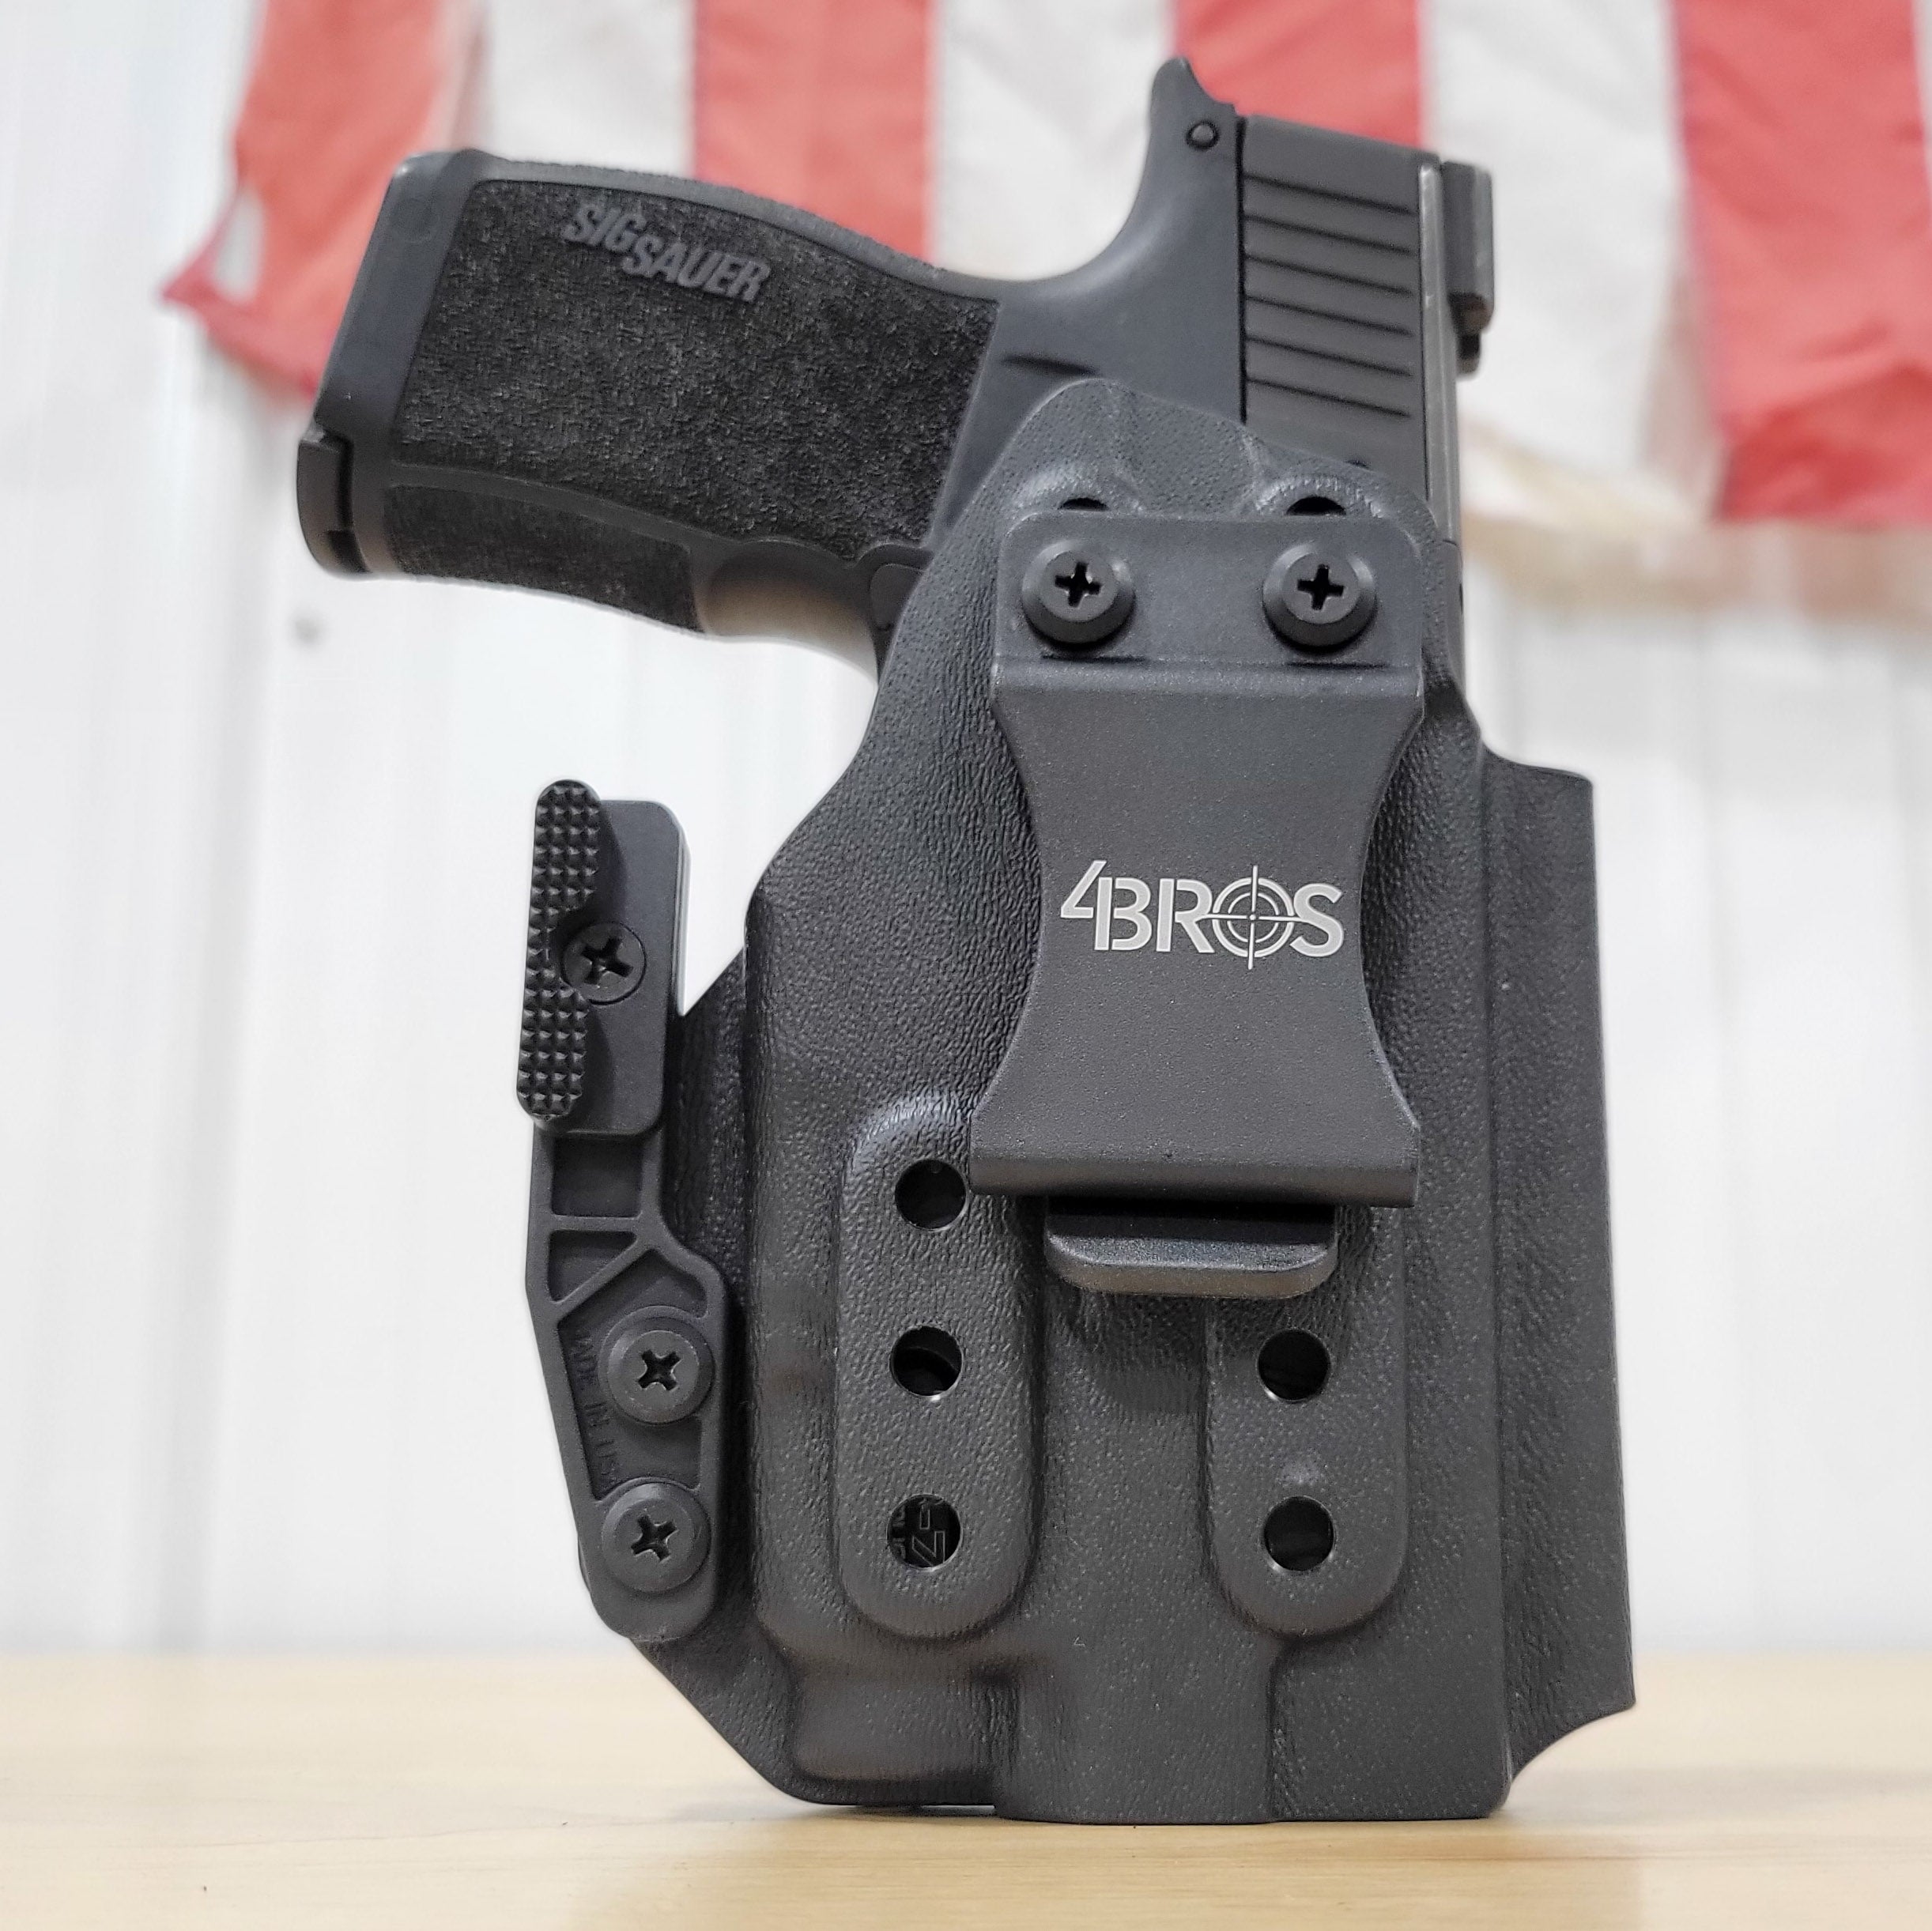 Inside waistband holster designed to fit the Sig Sauer P365 or P365XL pistol with the Tactical Development Pro Ledge Tactical Application Rail and Streamlight TLR-7 mounted to the weapon. This holster will fit the Sig P365, P365X, P365XL Spectre, P365 XL RomeoZero, P365X RomeoZero, P365 SAS and P365XL Spectre Comp.